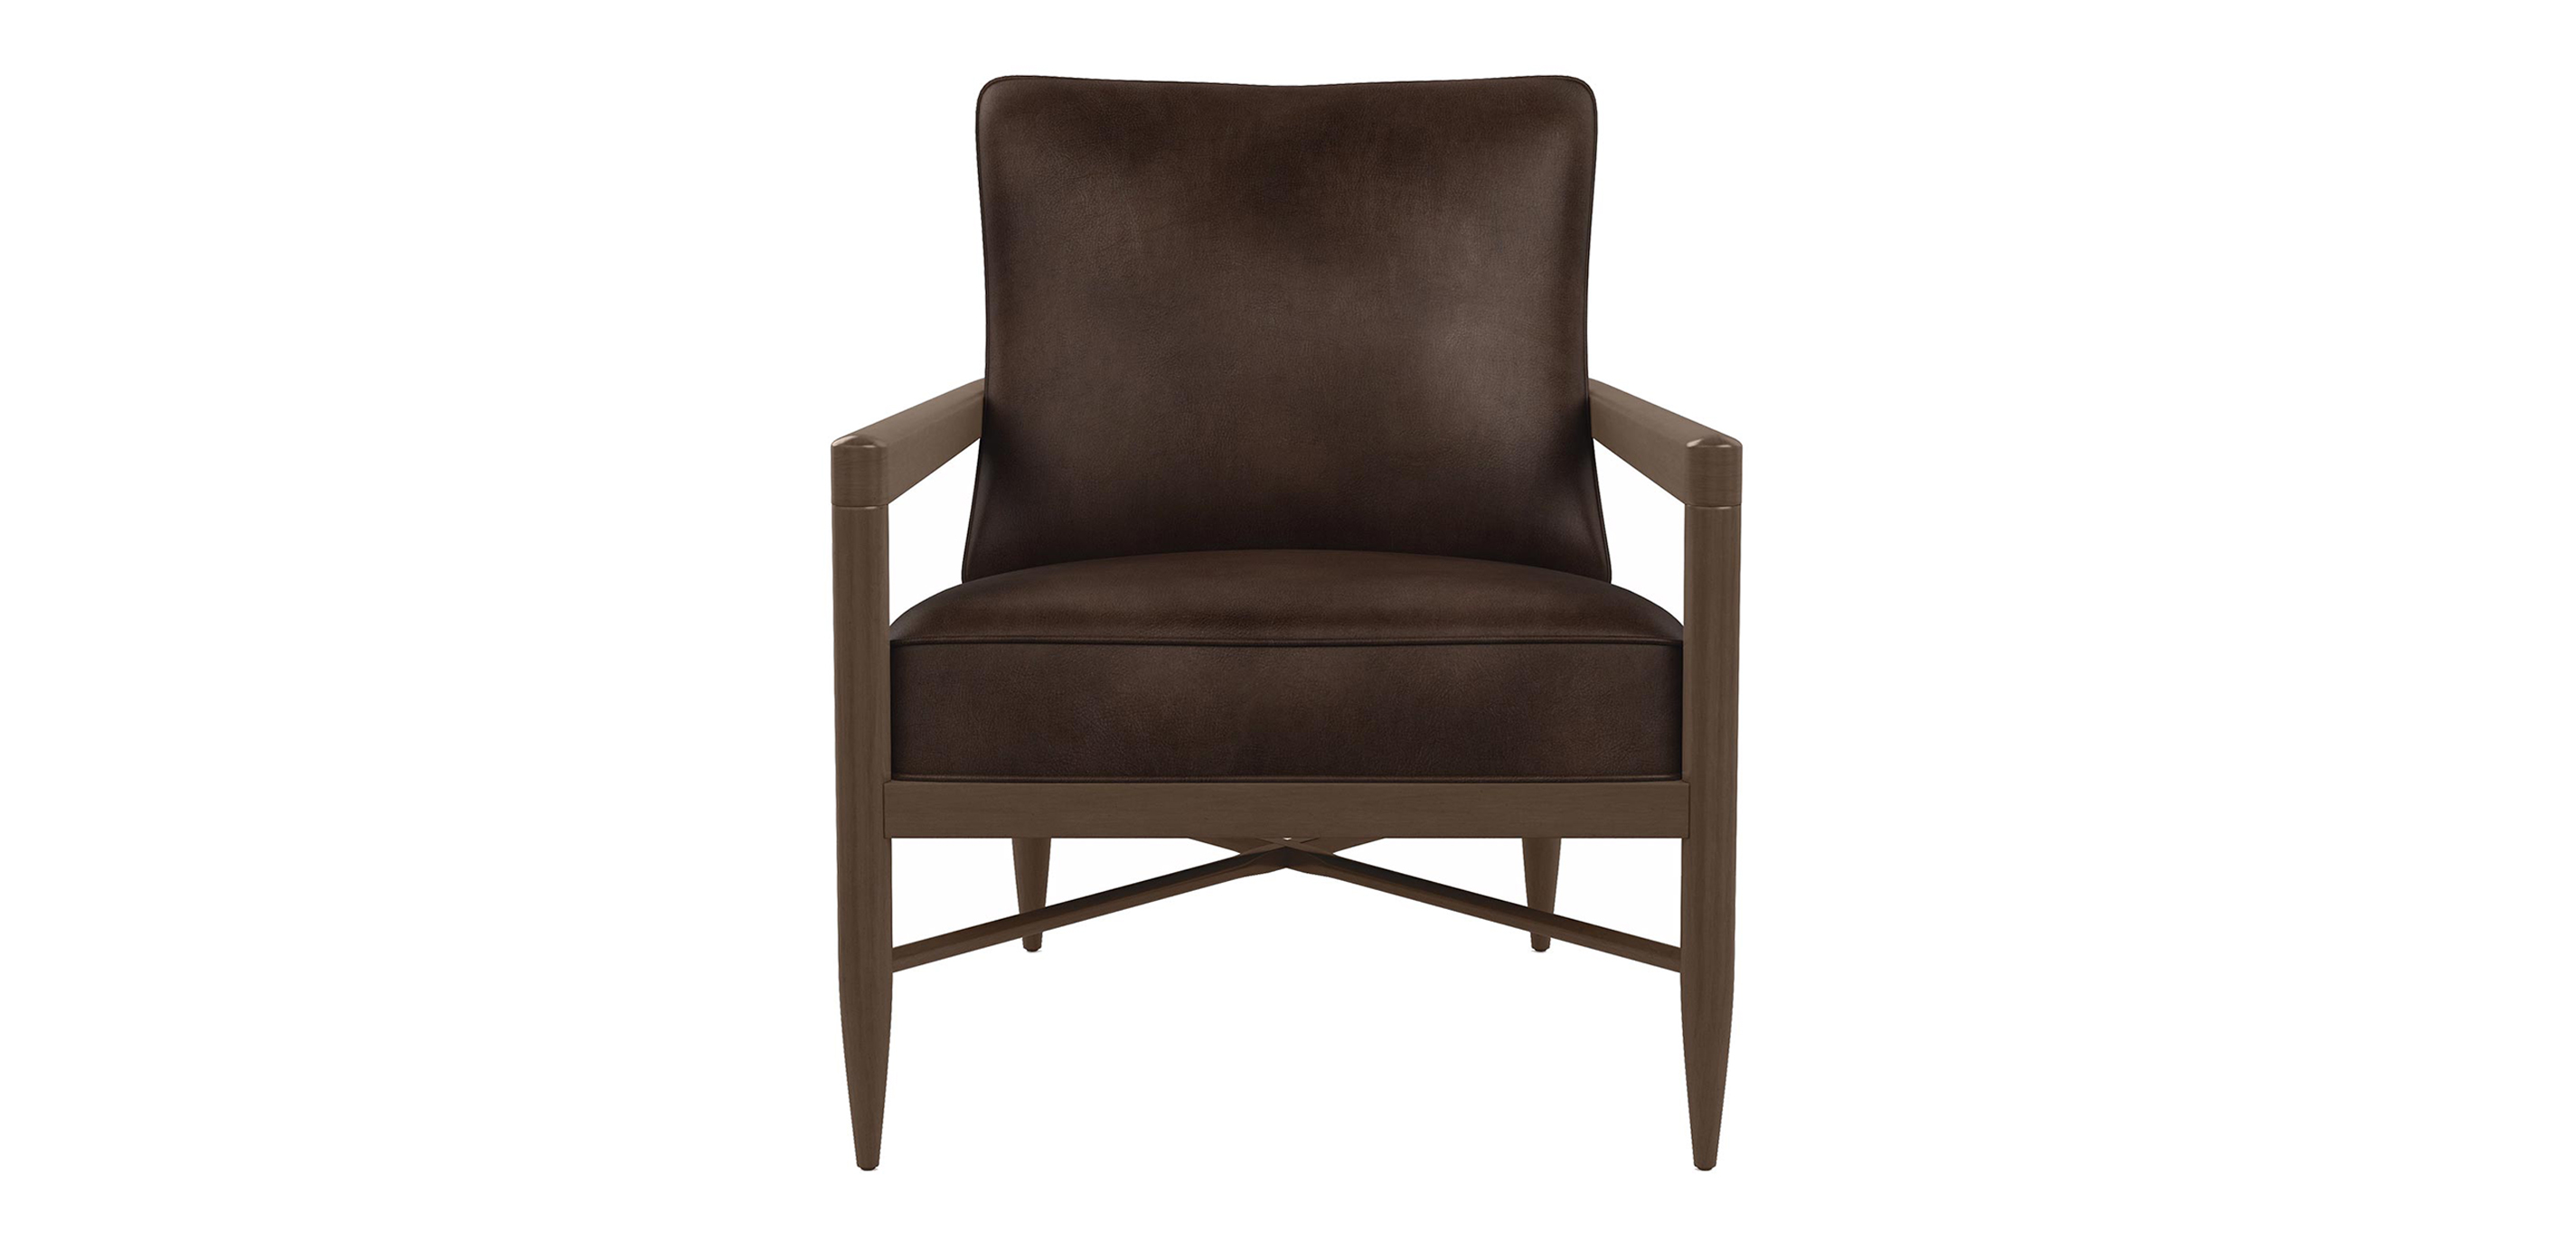 Elgin Leather Chair Chair And Ottoman Event Ethan Allen